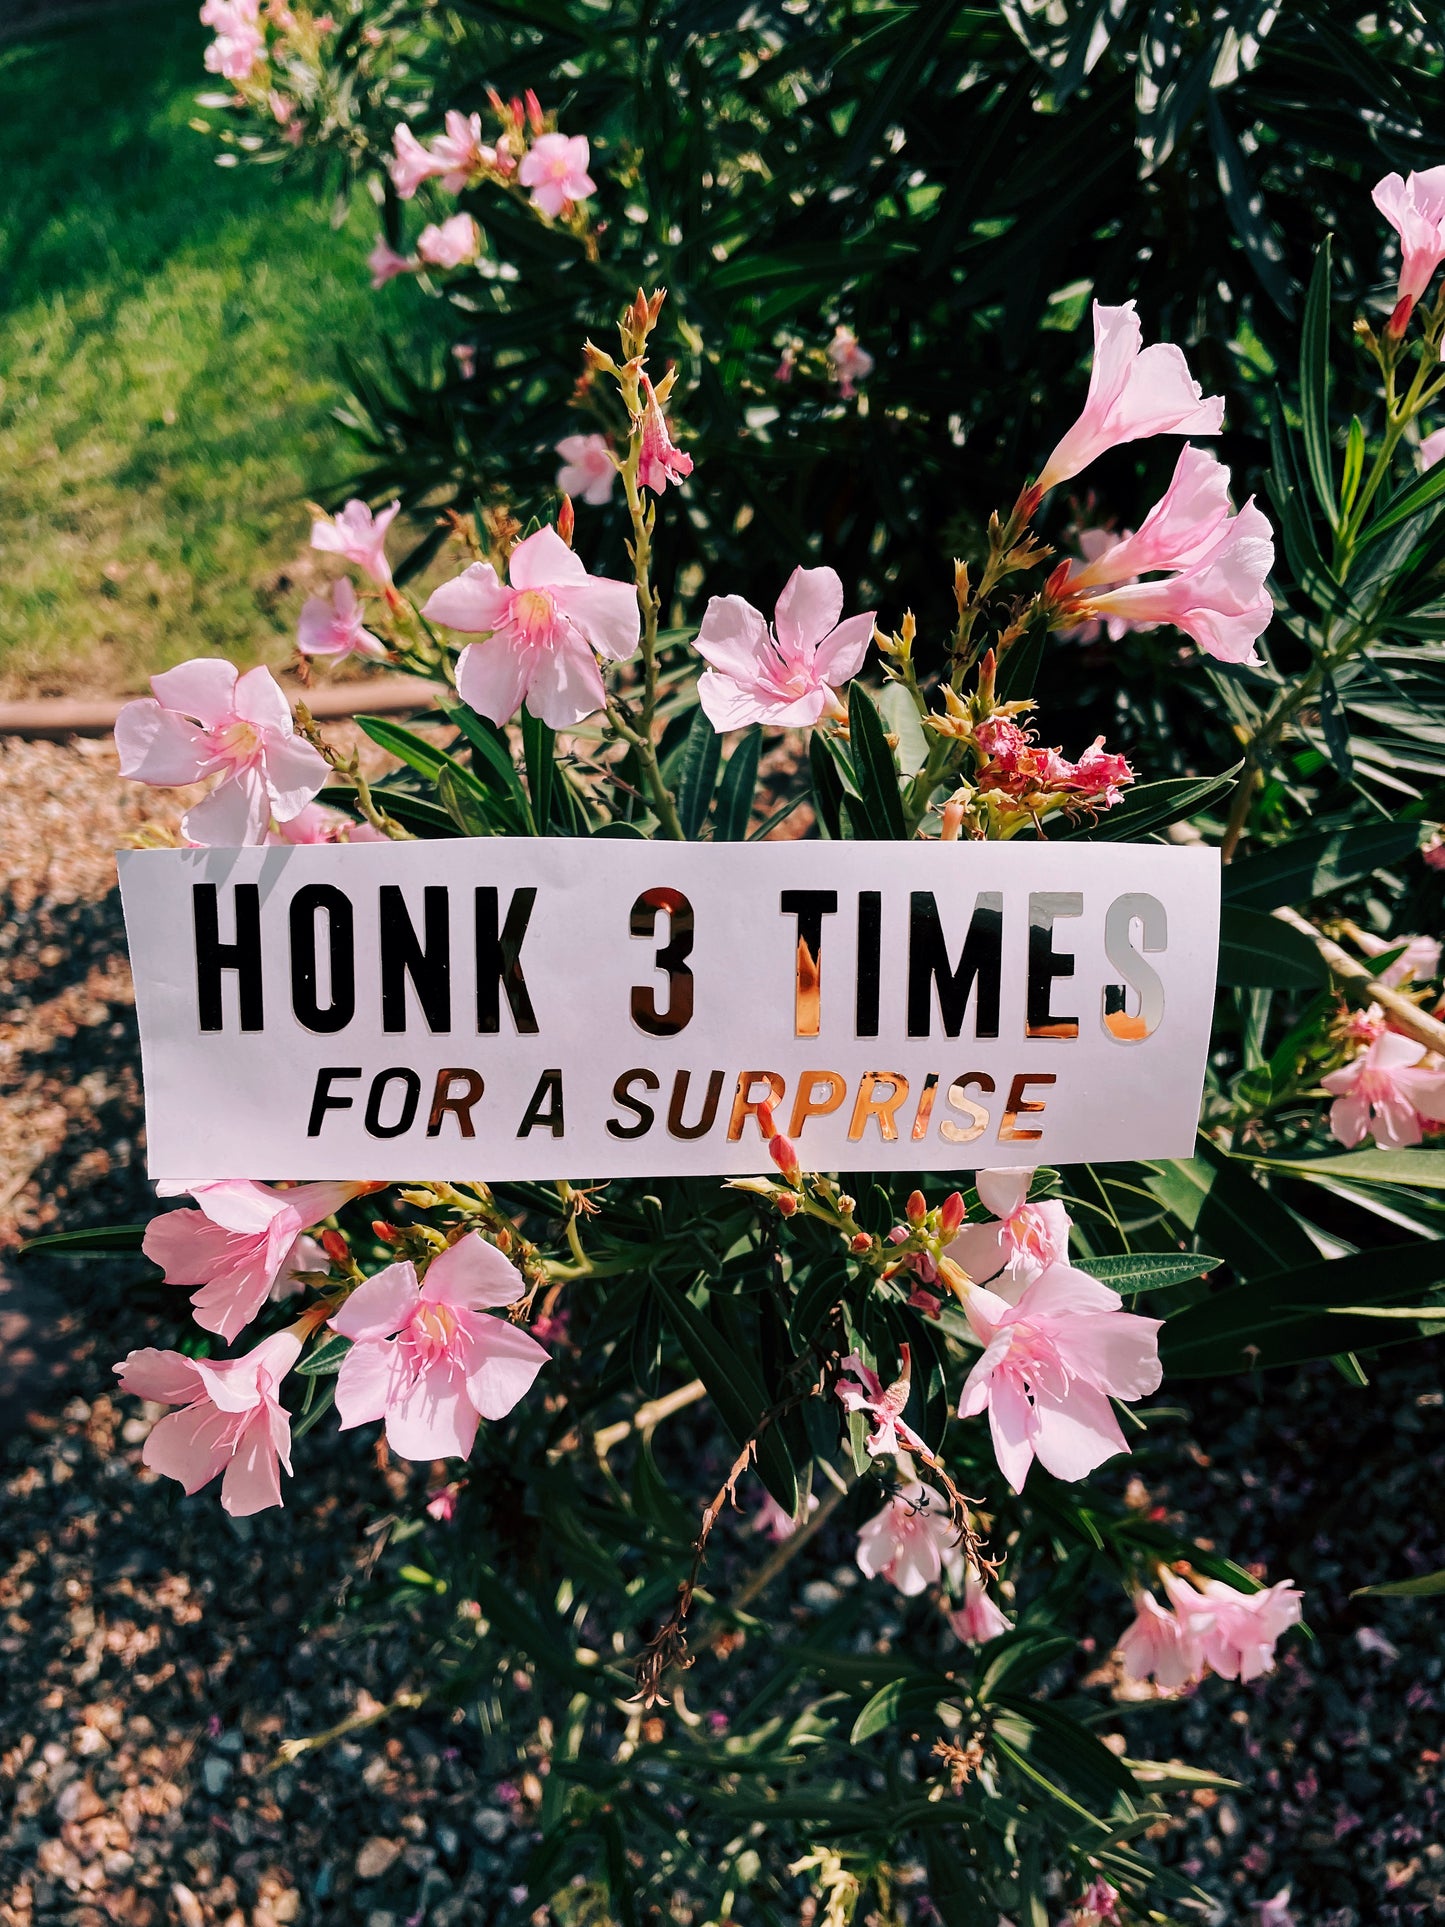 Honk 3 times for a surprise